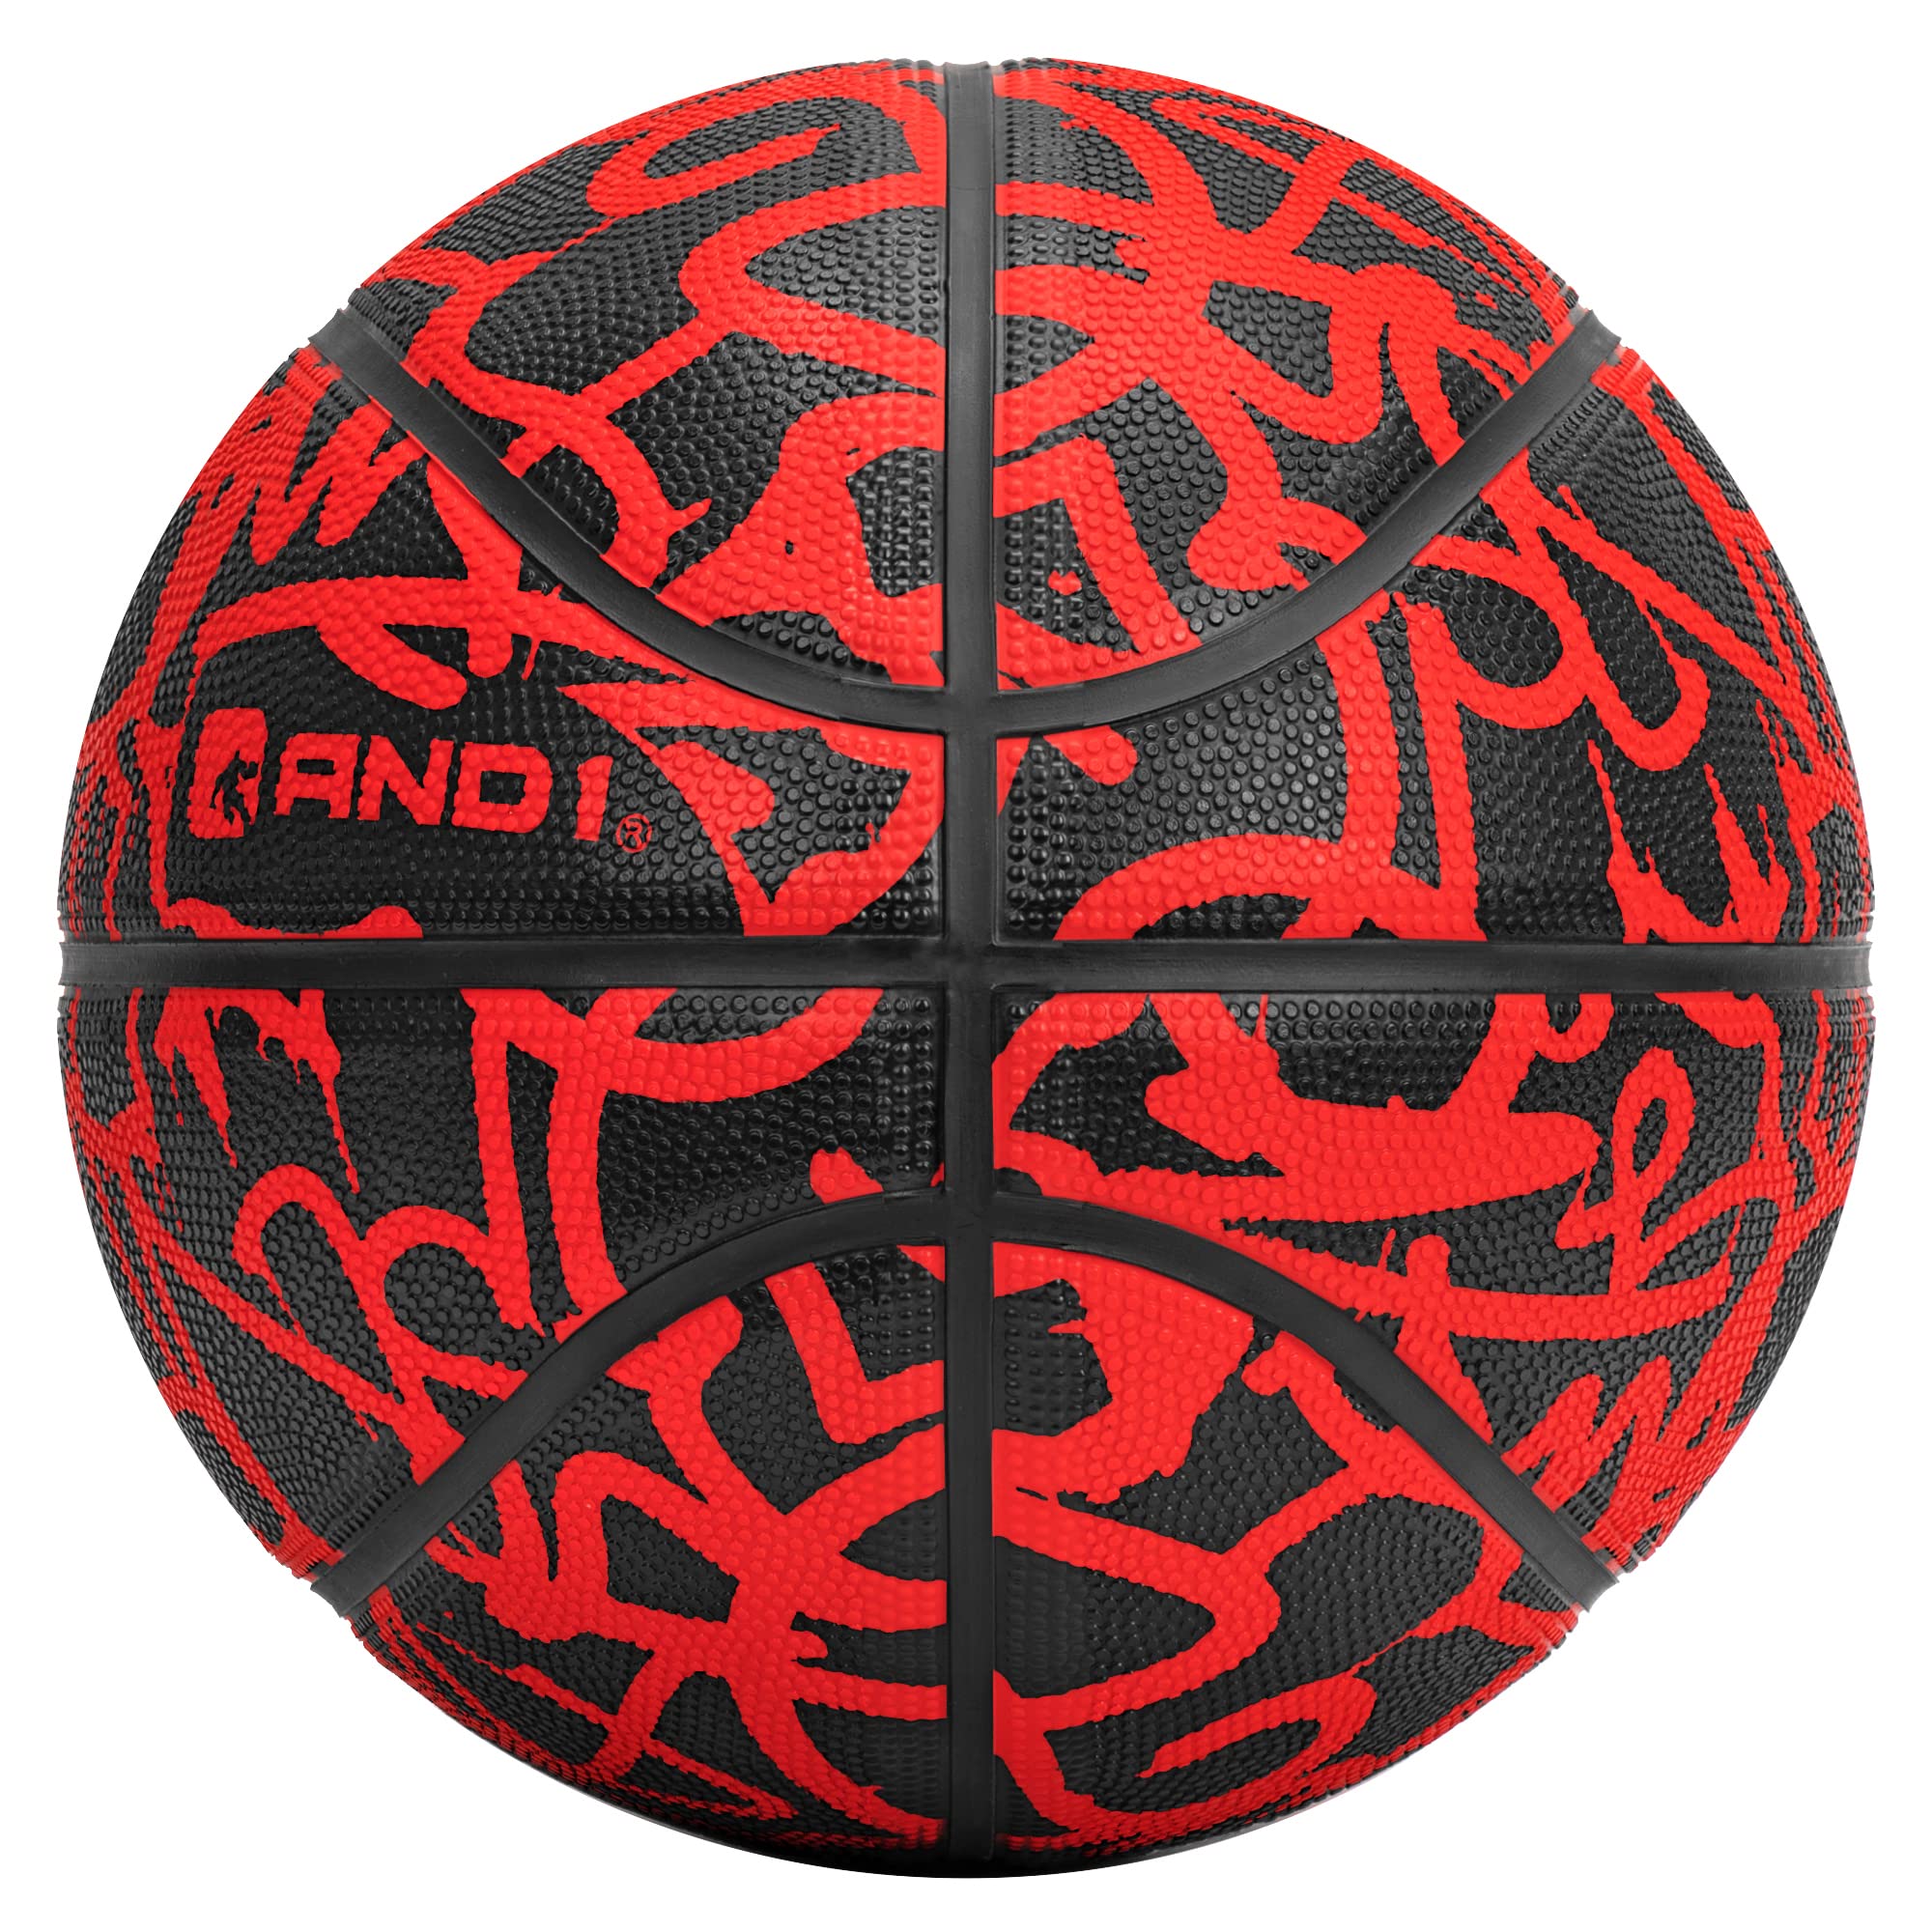 AND1 Fantom Graffiti Basketball: Official Regulation Size 7 (29.5 inches) Rubber Basketball - Deep Channel Construction Streetball, Made for Indoor Outdoor Basketball Games